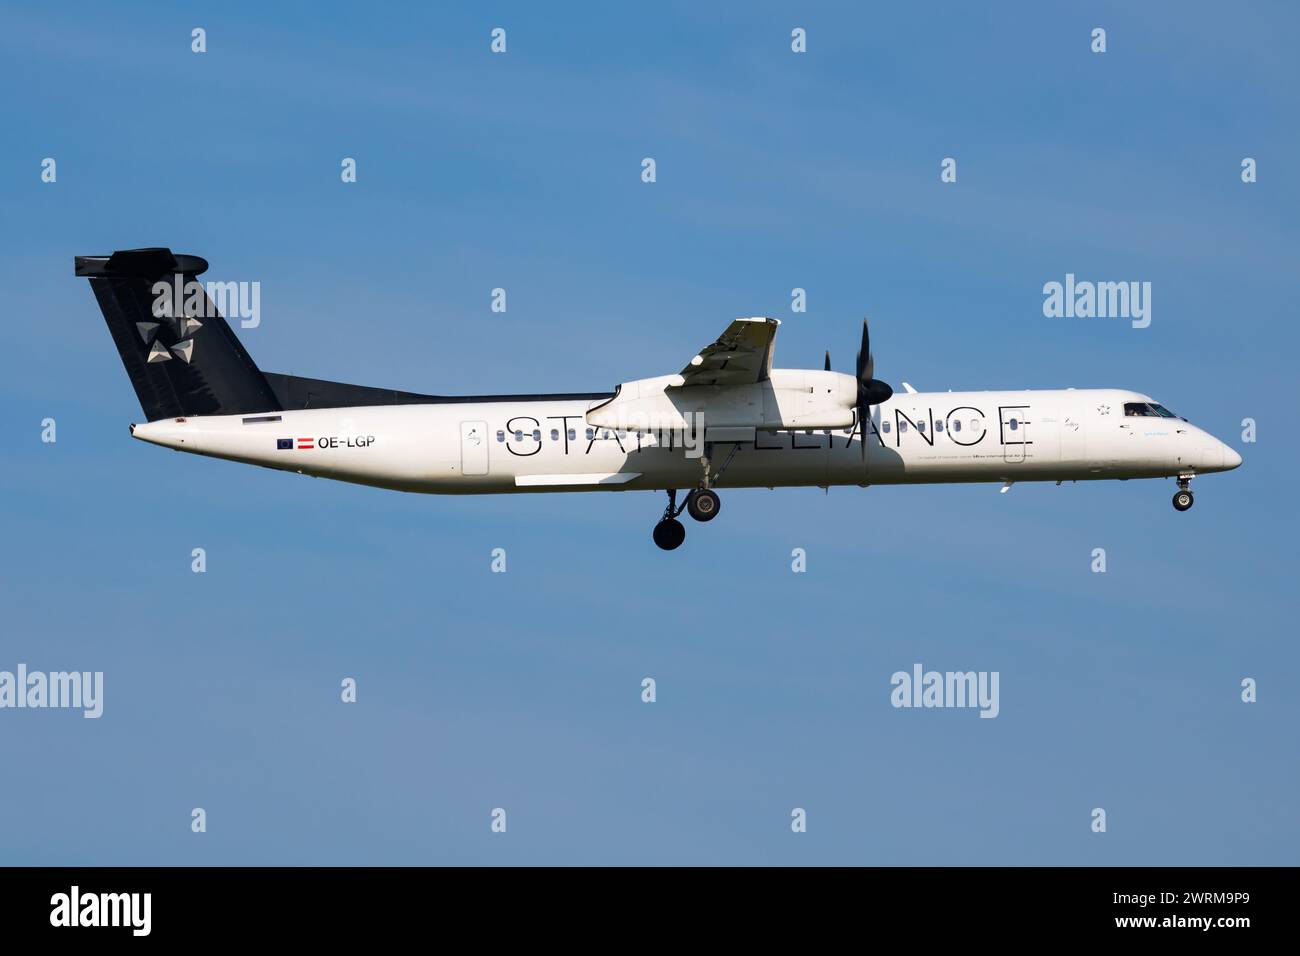 Vienna, Austria - May 20, 2018: Star Alliance Austrian Airlines Bombardier DHC-8 Q400 OE-LGP passenger plane arrival and landing at Vienna Airport Stock Photo